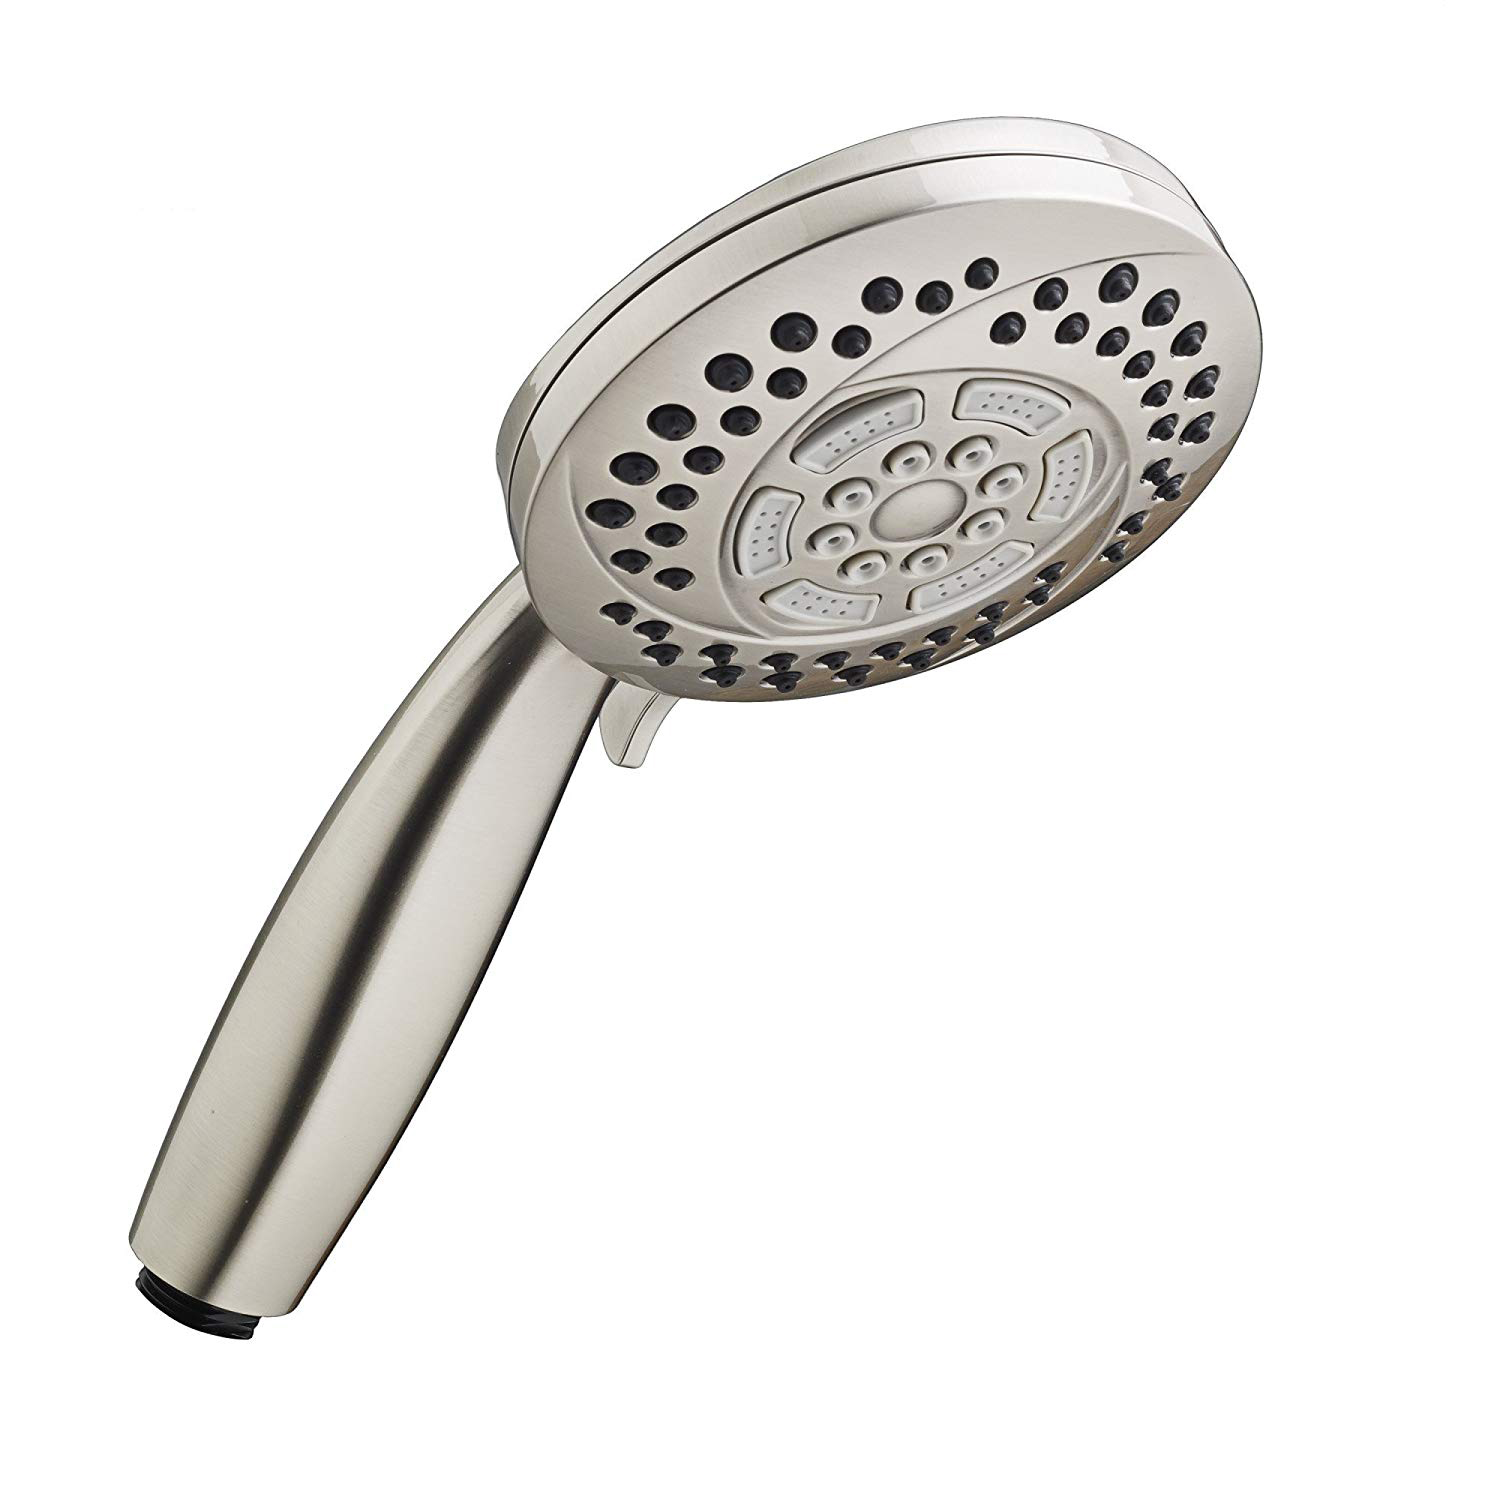 HydroFocus 6-Function Hand Shower in Brushed Nickel, 2.0 gpm